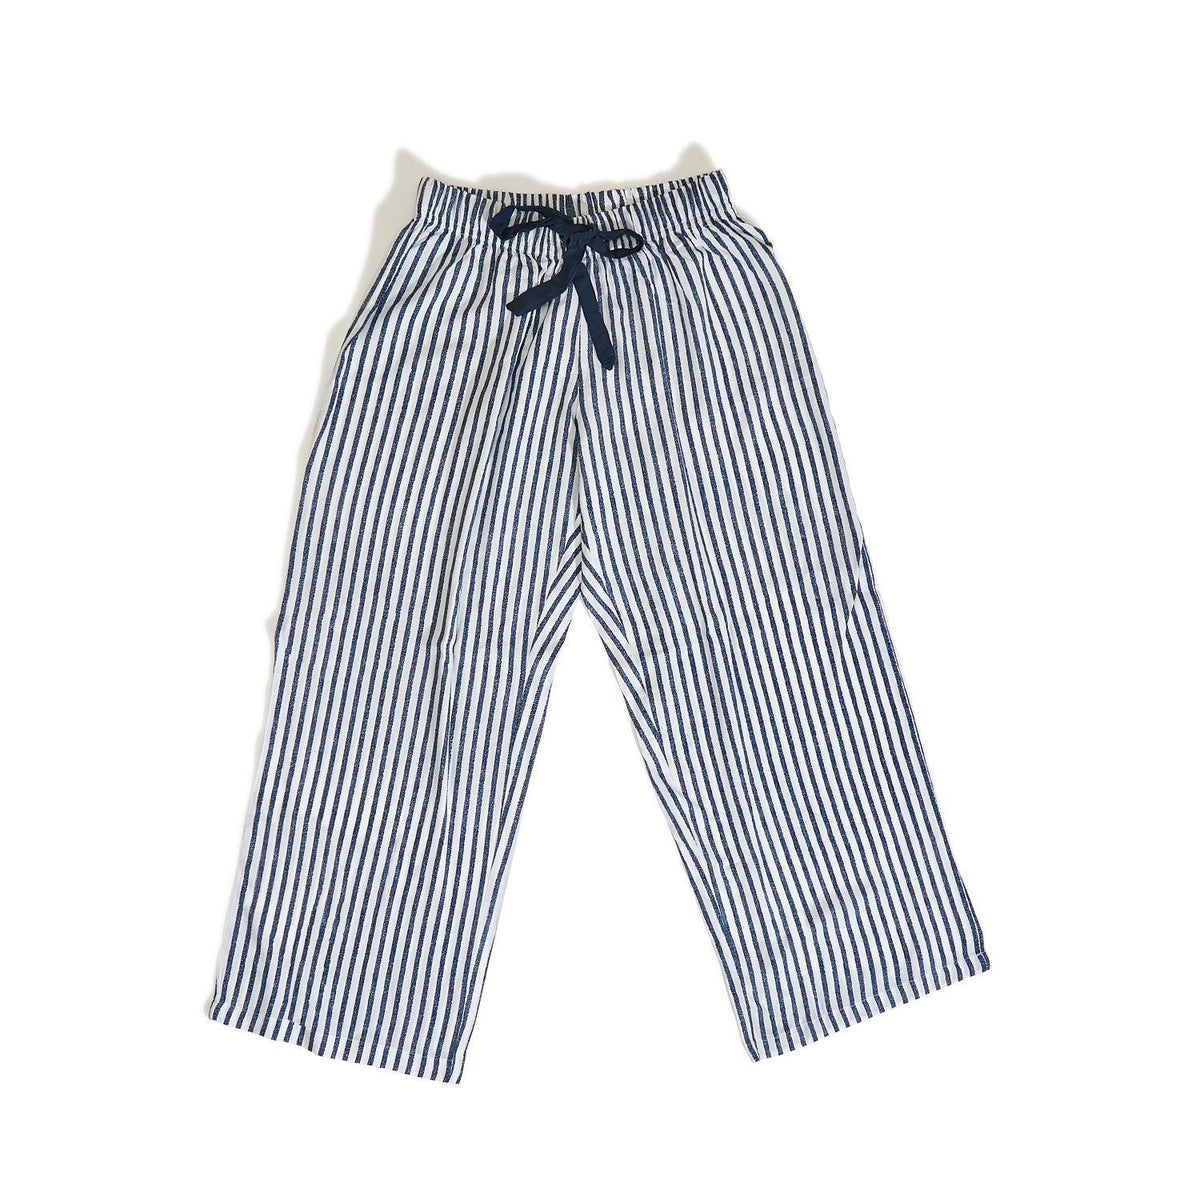 Striped Lounge Pants with Stretch Drawstring Waistband